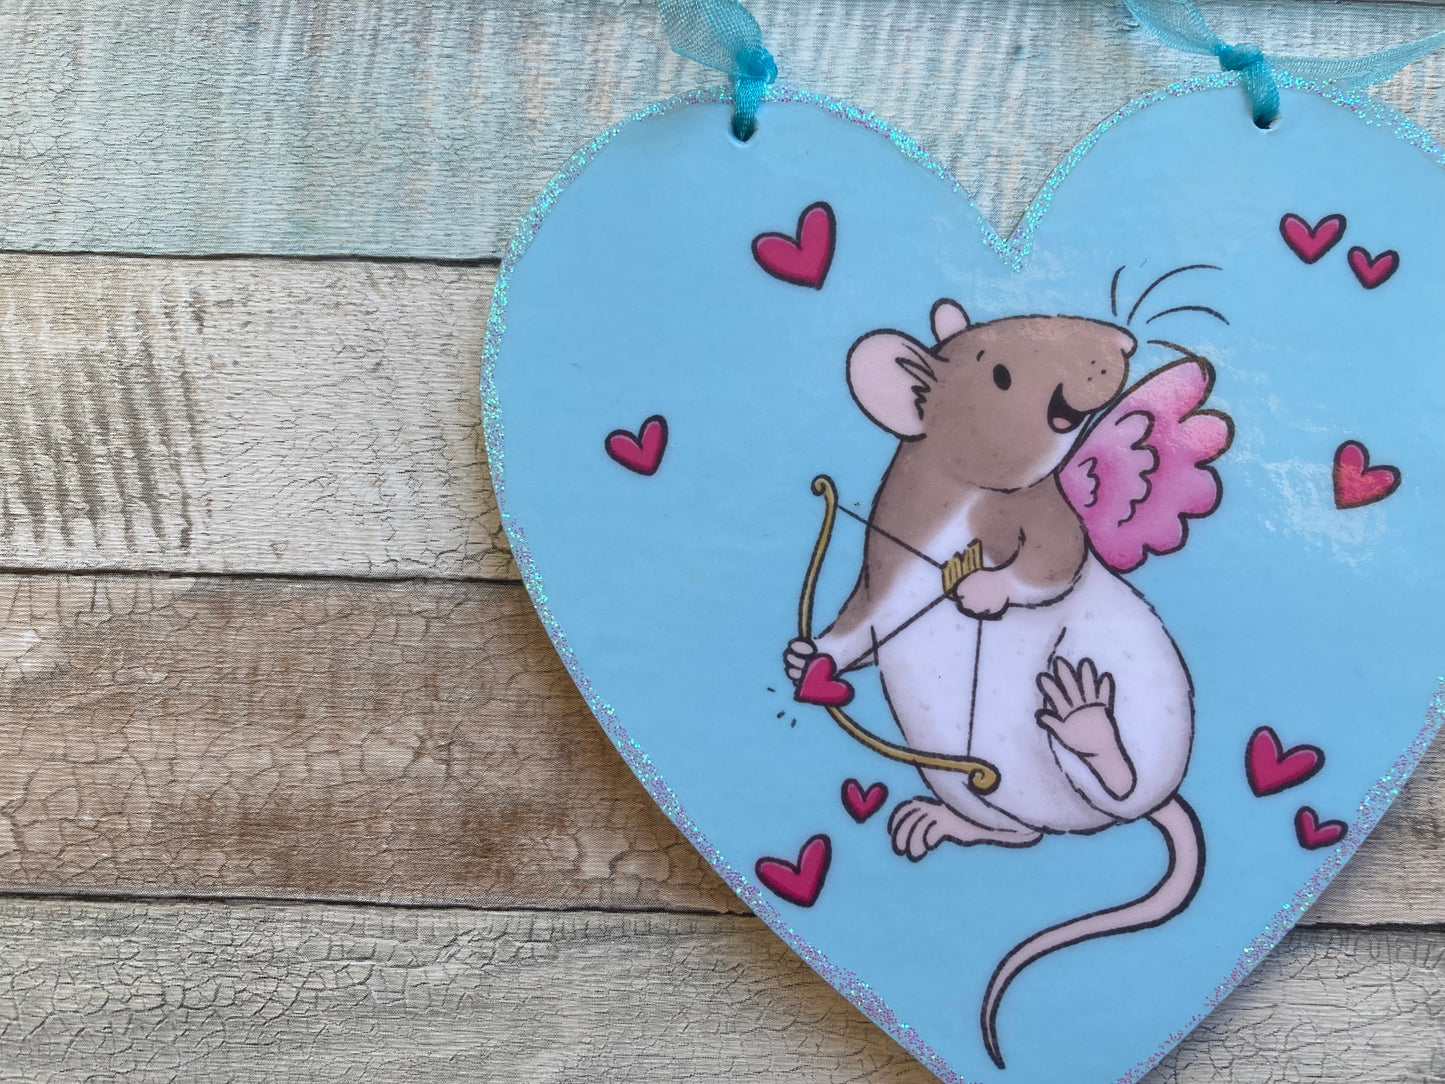 Cupid Ratty | Cute Rat Hanging Heart Decoration | Rat Valentines Day Gift